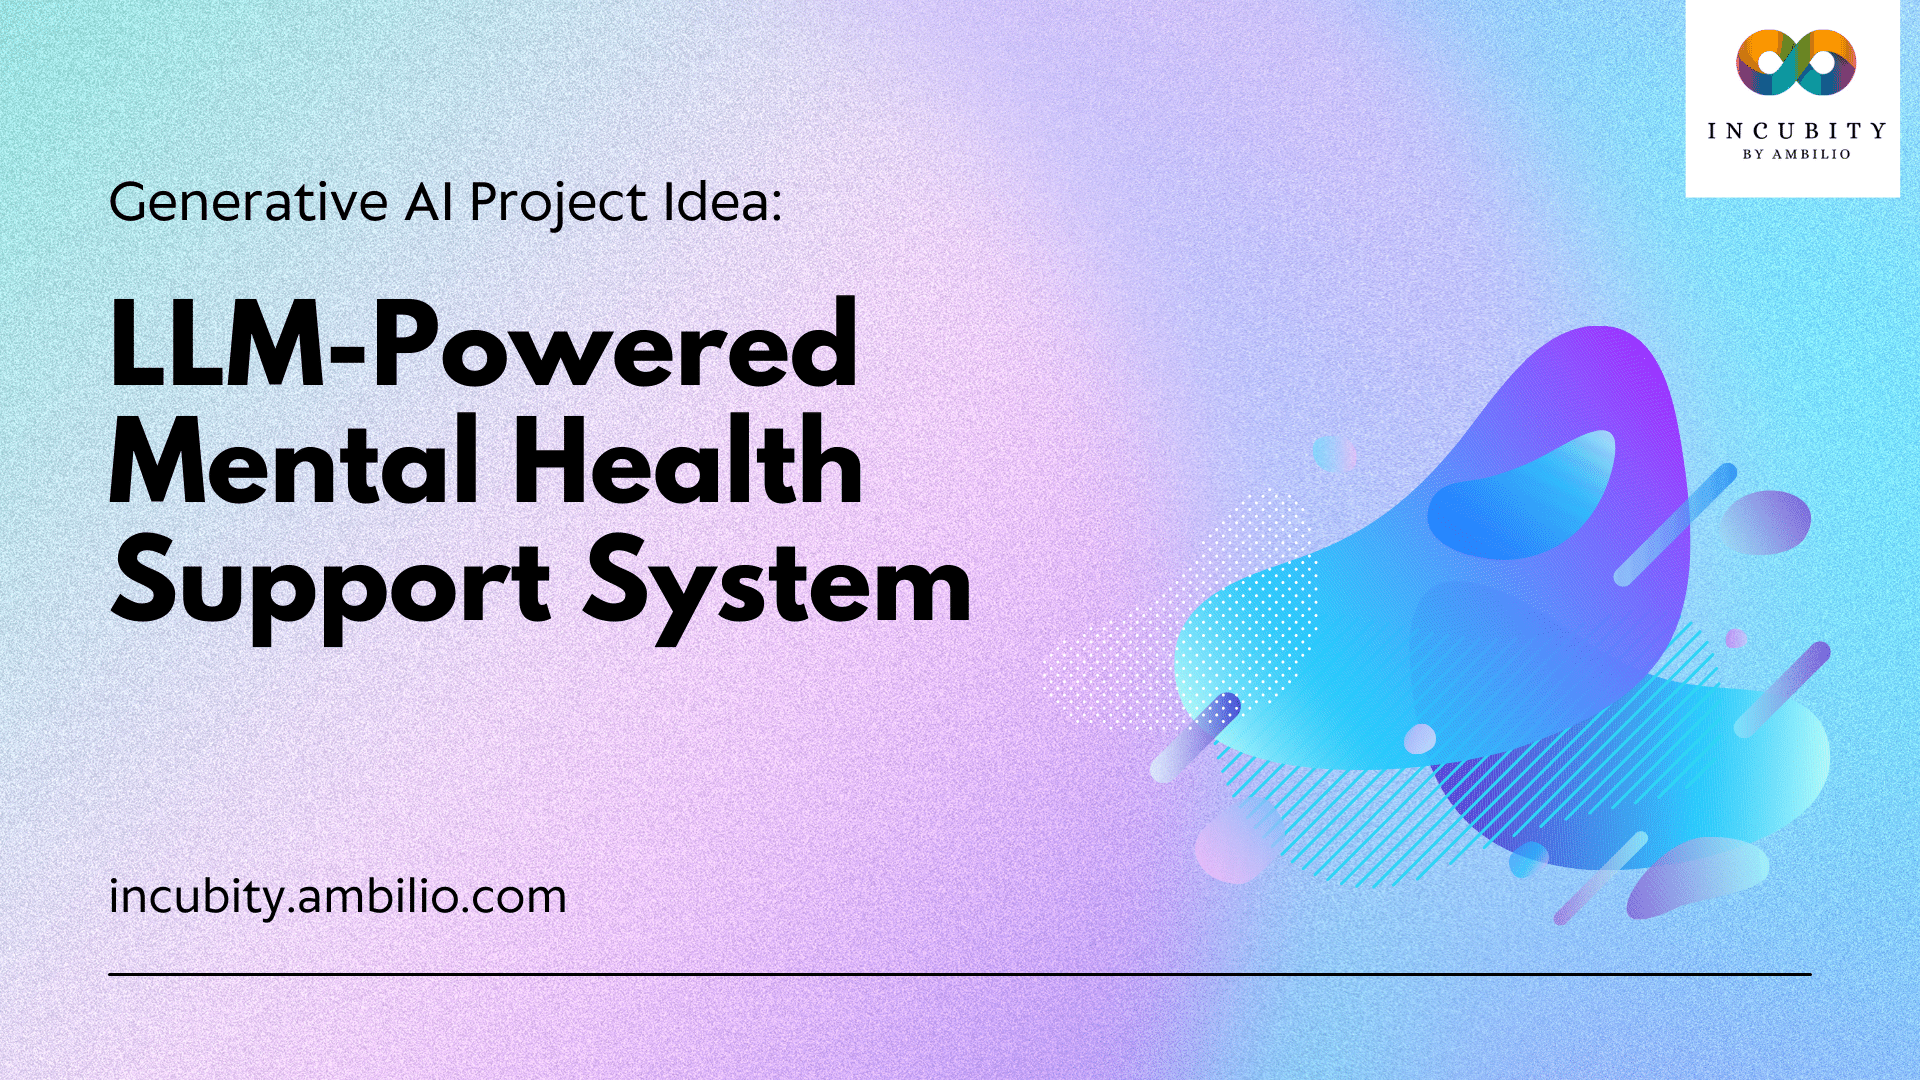 Building a LLM-Powered Mental Health Support System